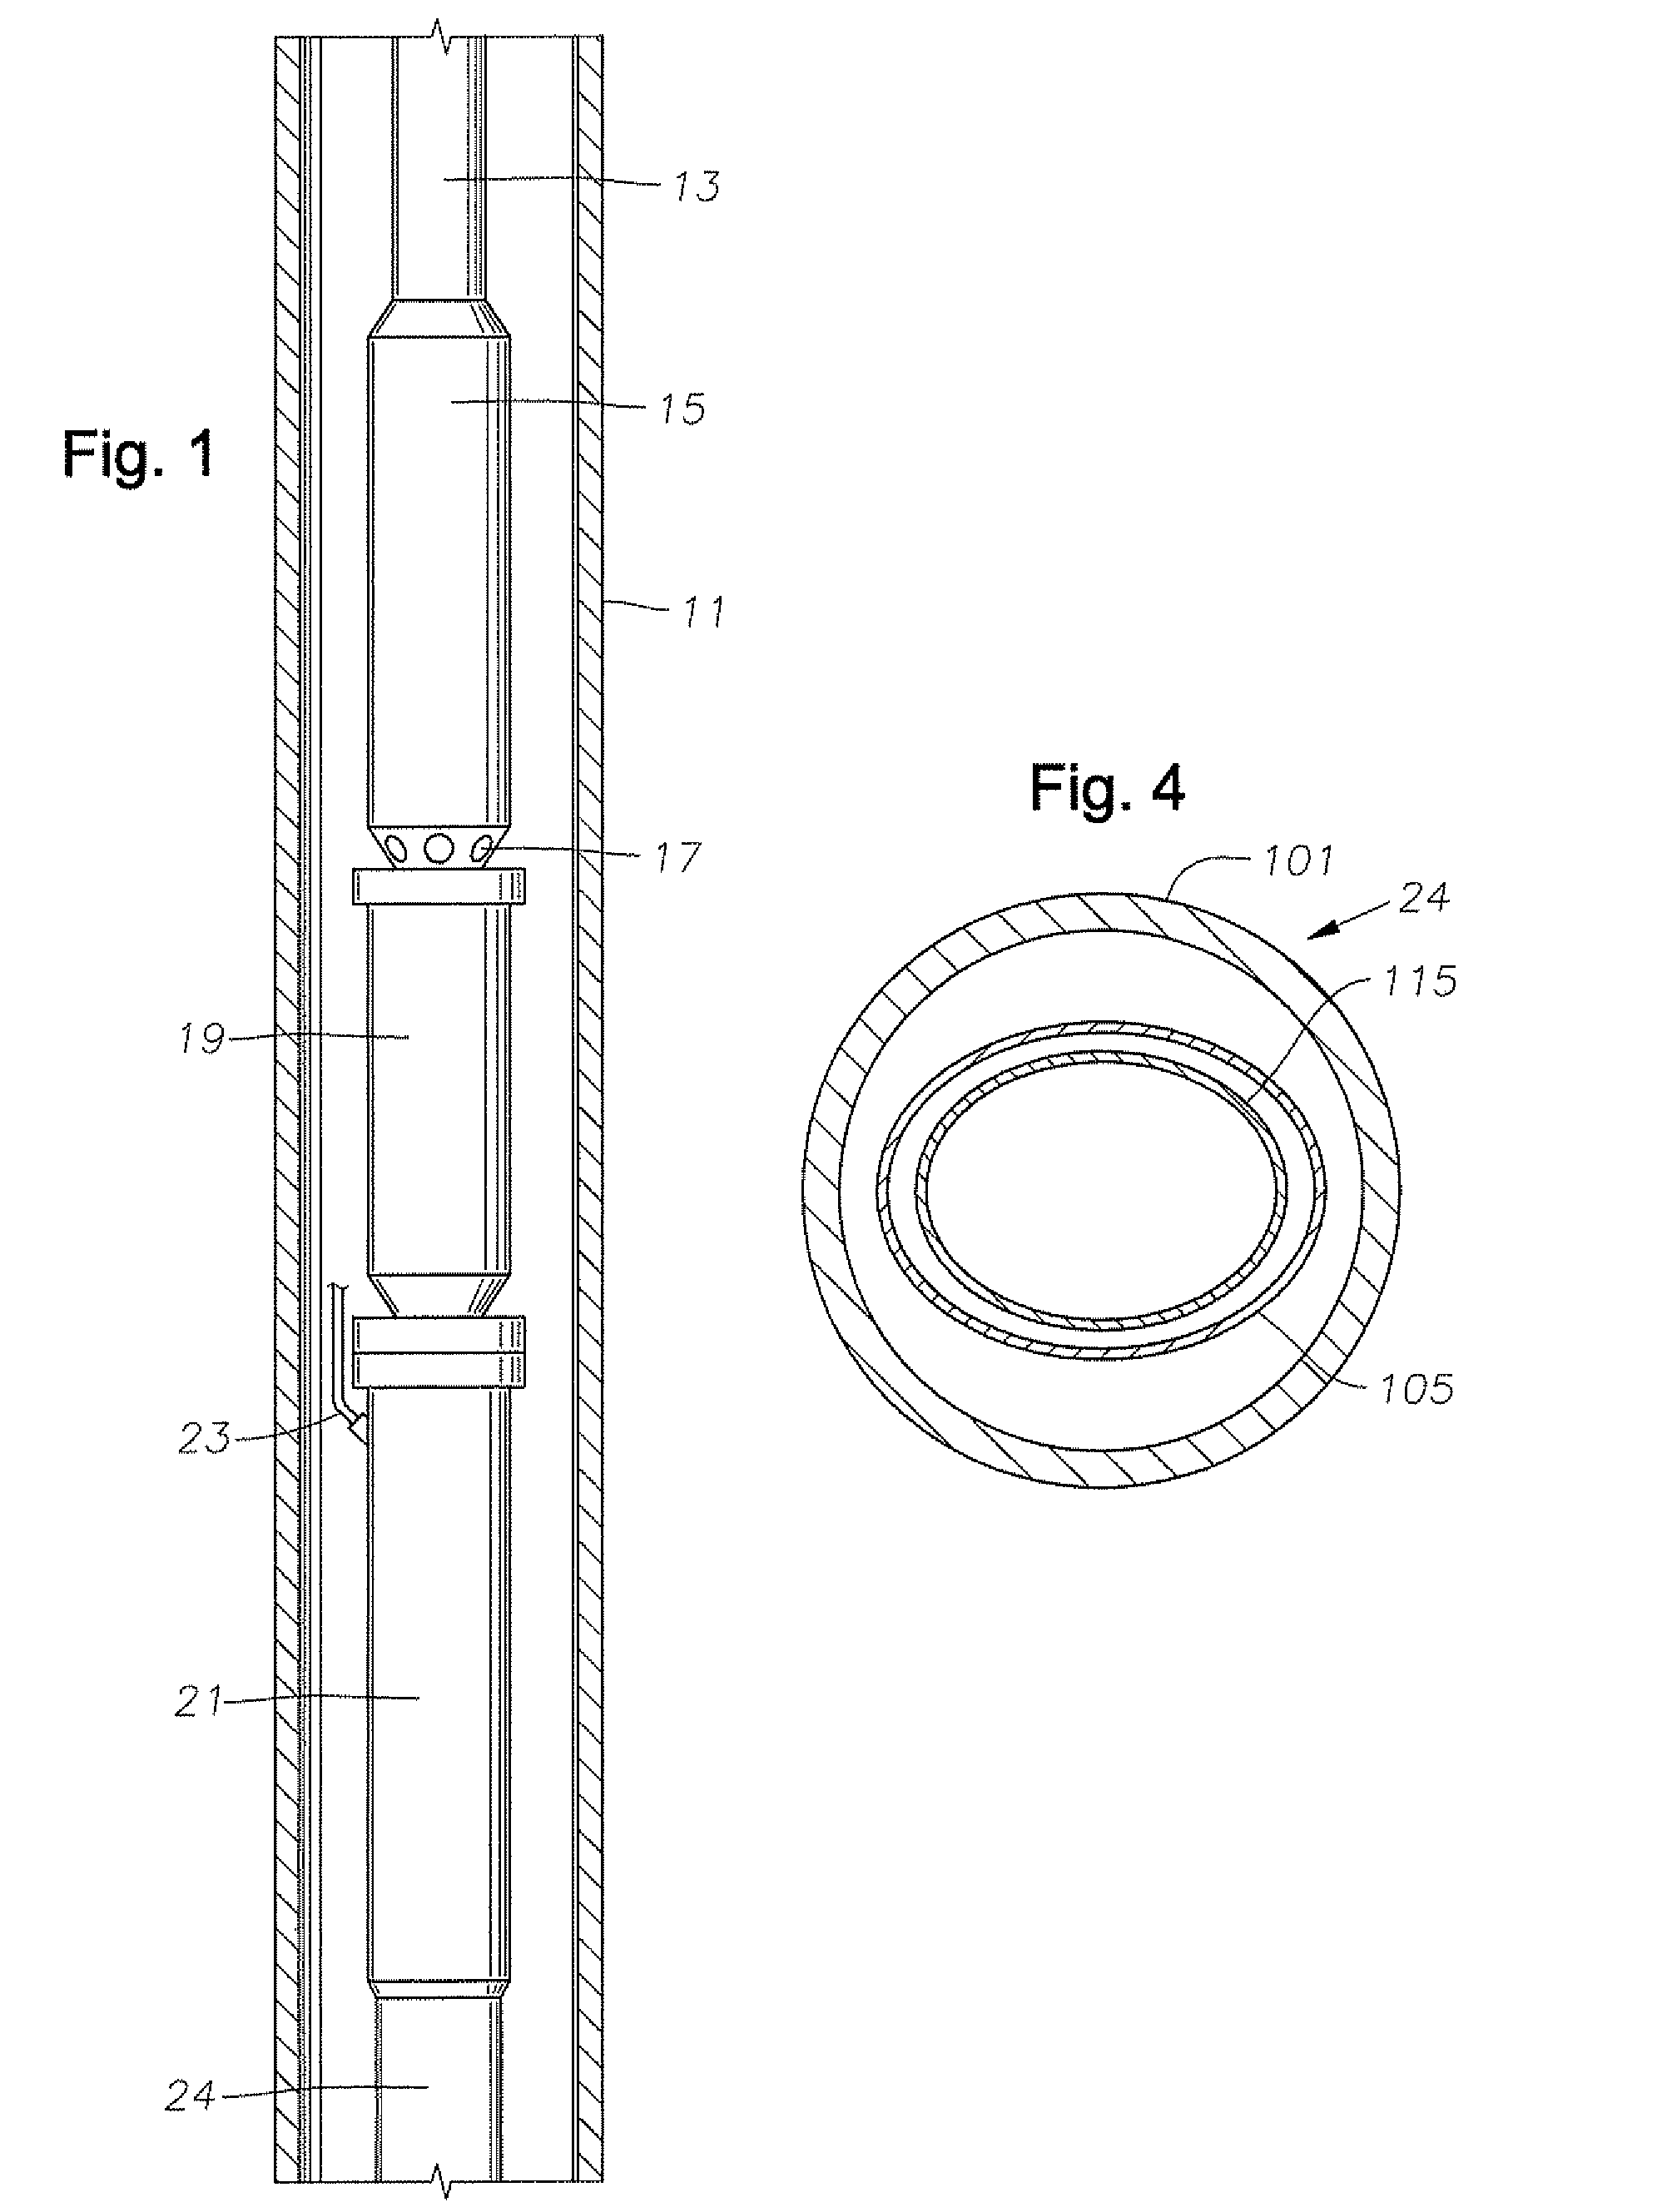 Pressure equalizer in thrust chamber electrical submersible pump assembly having dual pressure barriers